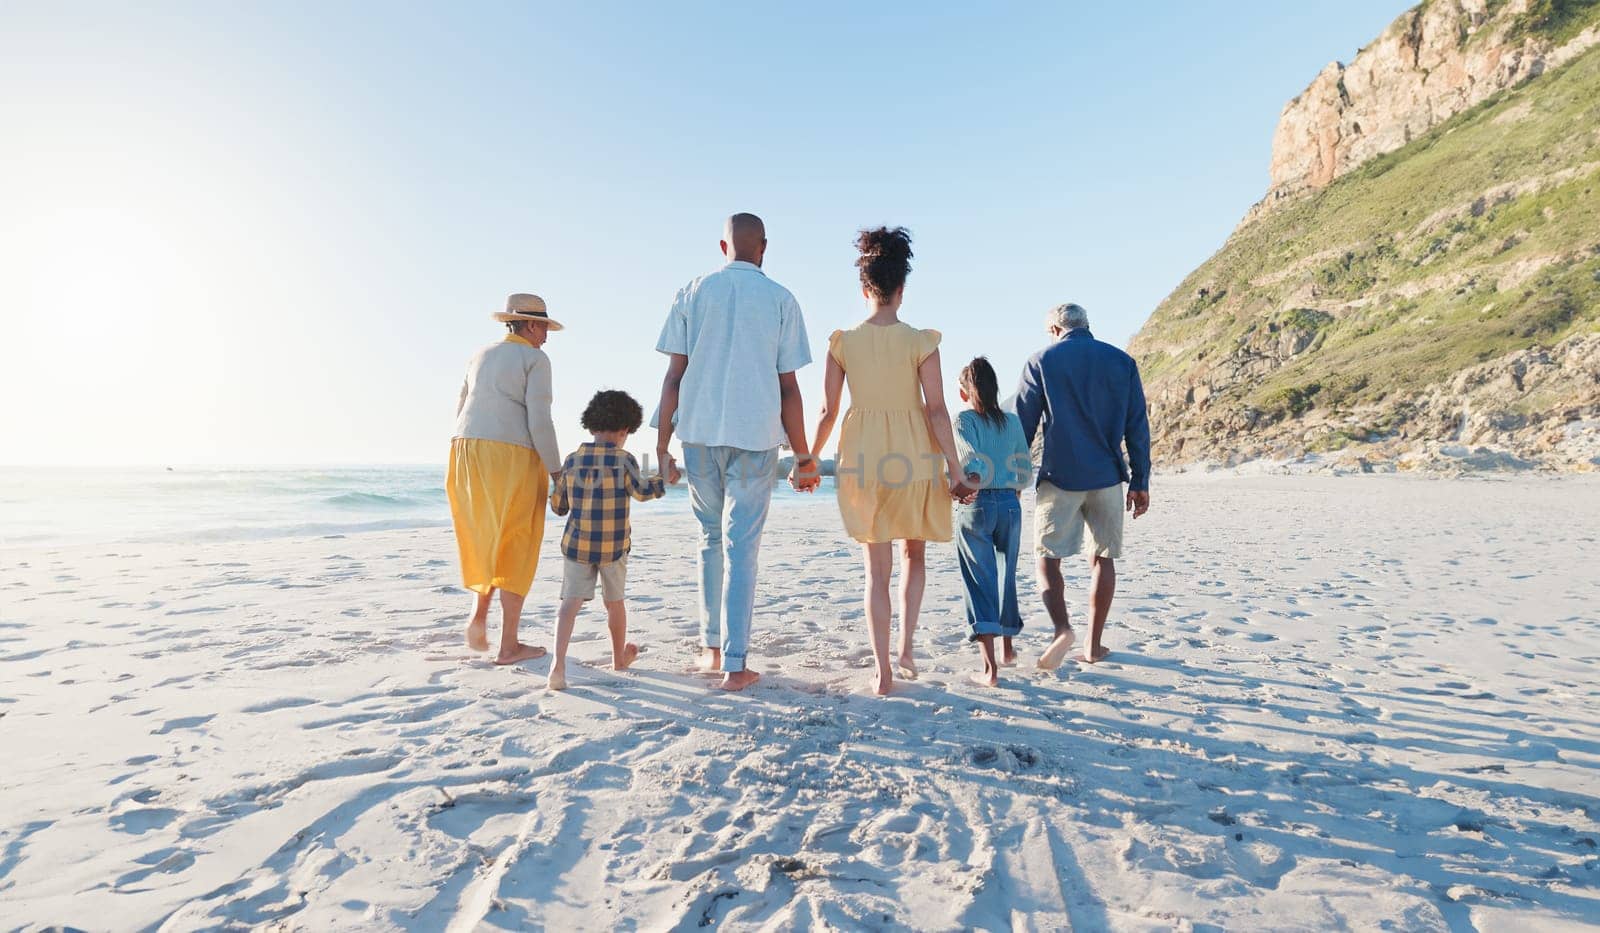 Holding hands, walking and big family at the beach on holiday, adventure or vacation together. Love, travel and children with parents and grandparents on the sand by the ocean or sea on weekend trip